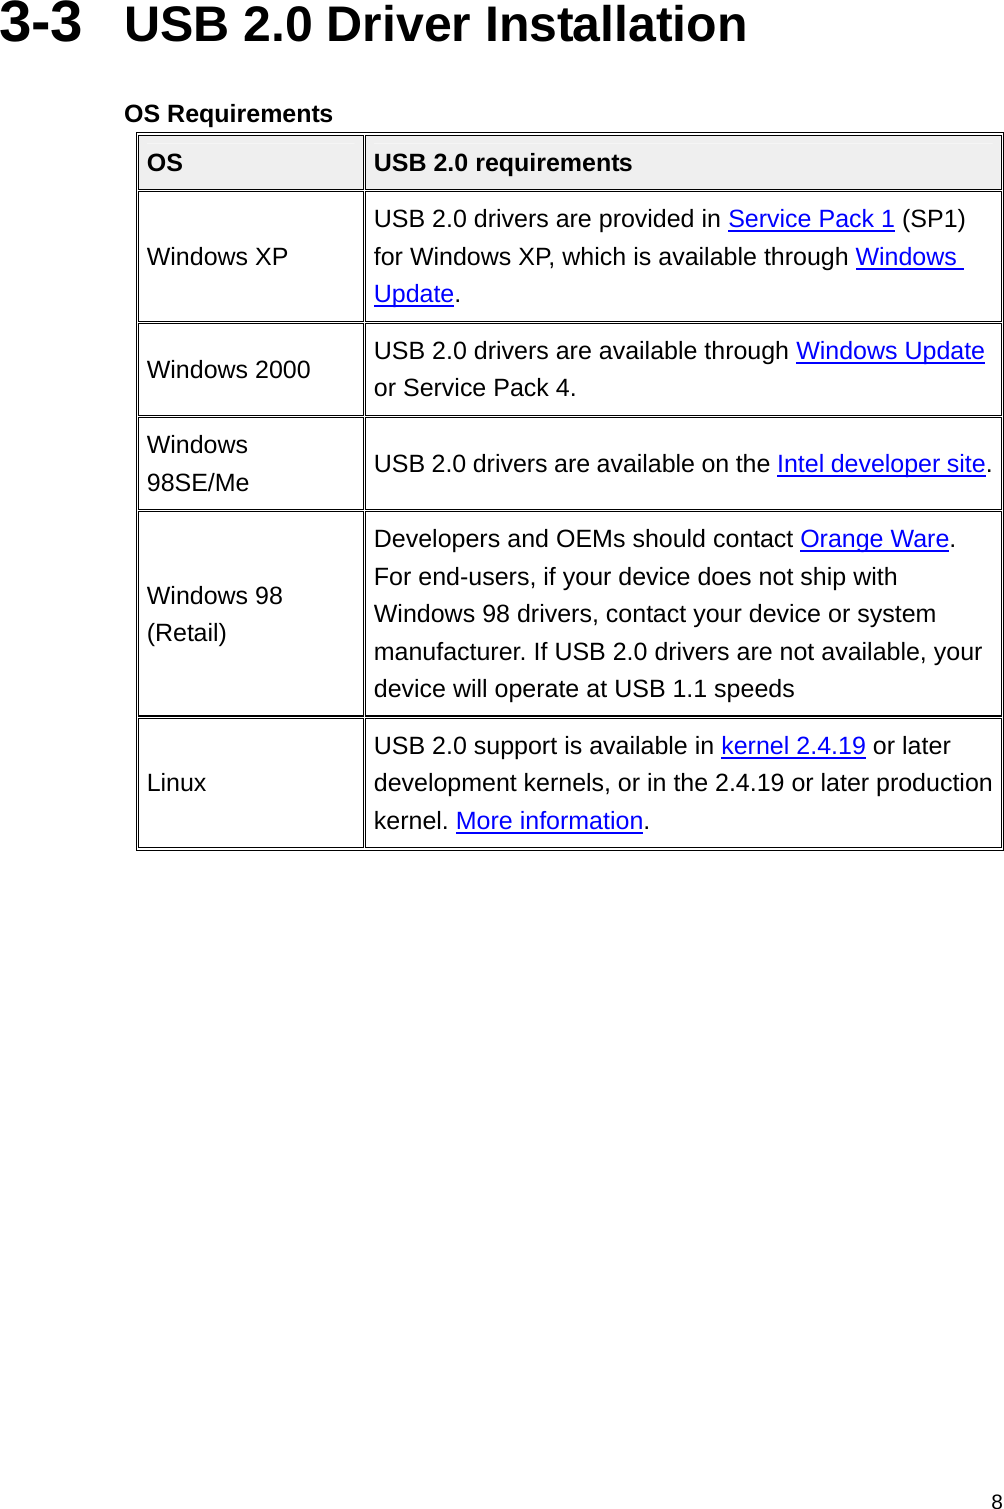  83-3  USB 2.0 Driver Installation  OS Requirements OS  USB 2.0 requirements Windows XP USB 2.0 drivers are provided in Service Pack 1 (SP1) for Windows XP, which is available through Windows Update. Windows 2000  USB 2.0 drivers are available through Windows Update or Service Pack 4. Windows 98SE/Me  USB 2.0 drivers are available on the Intel developer site.Windows 98 (Retail) Developers and OEMs should contact Orange Ware. For end-users, if your device does not ship with Windows 98 drivers, contact your device or system manufacturer. If USB 2.0 drivers are not available, your device will operate at USB 1.1 speeds Linux USB 2.0 support is available in kernel 2.4.19 or later development kernels, or in the 2.4.19 or later production kernel. More information.          